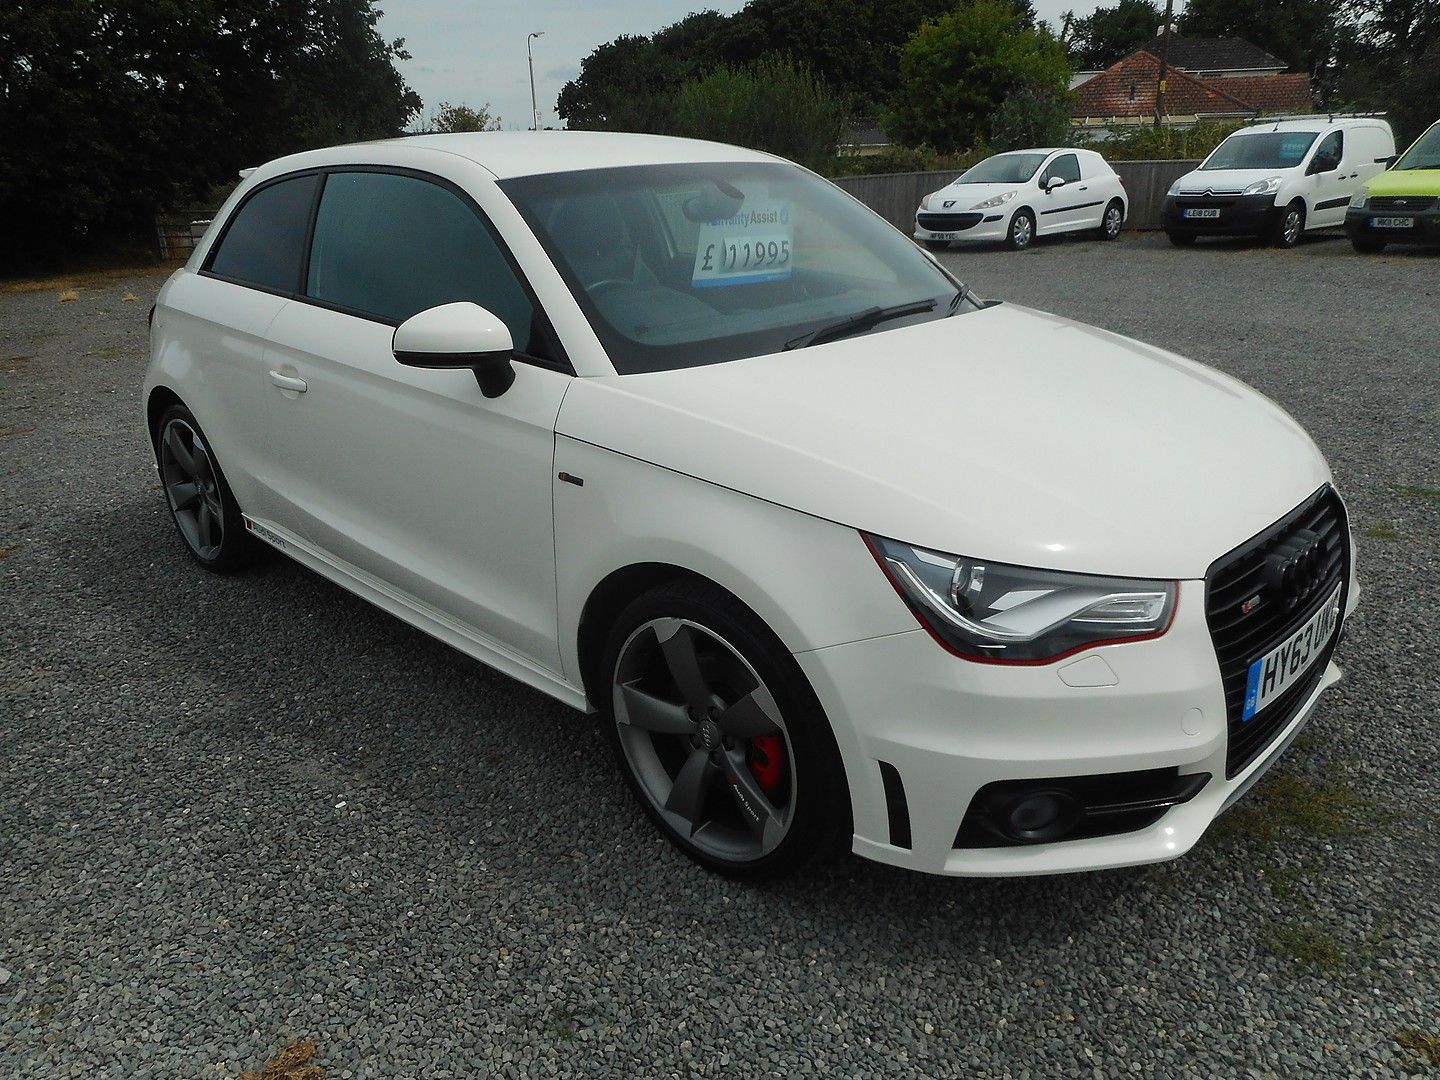 AUDI A1 1.4 TFSI Black Edition 185PS S tronic (2013) - Picture 5